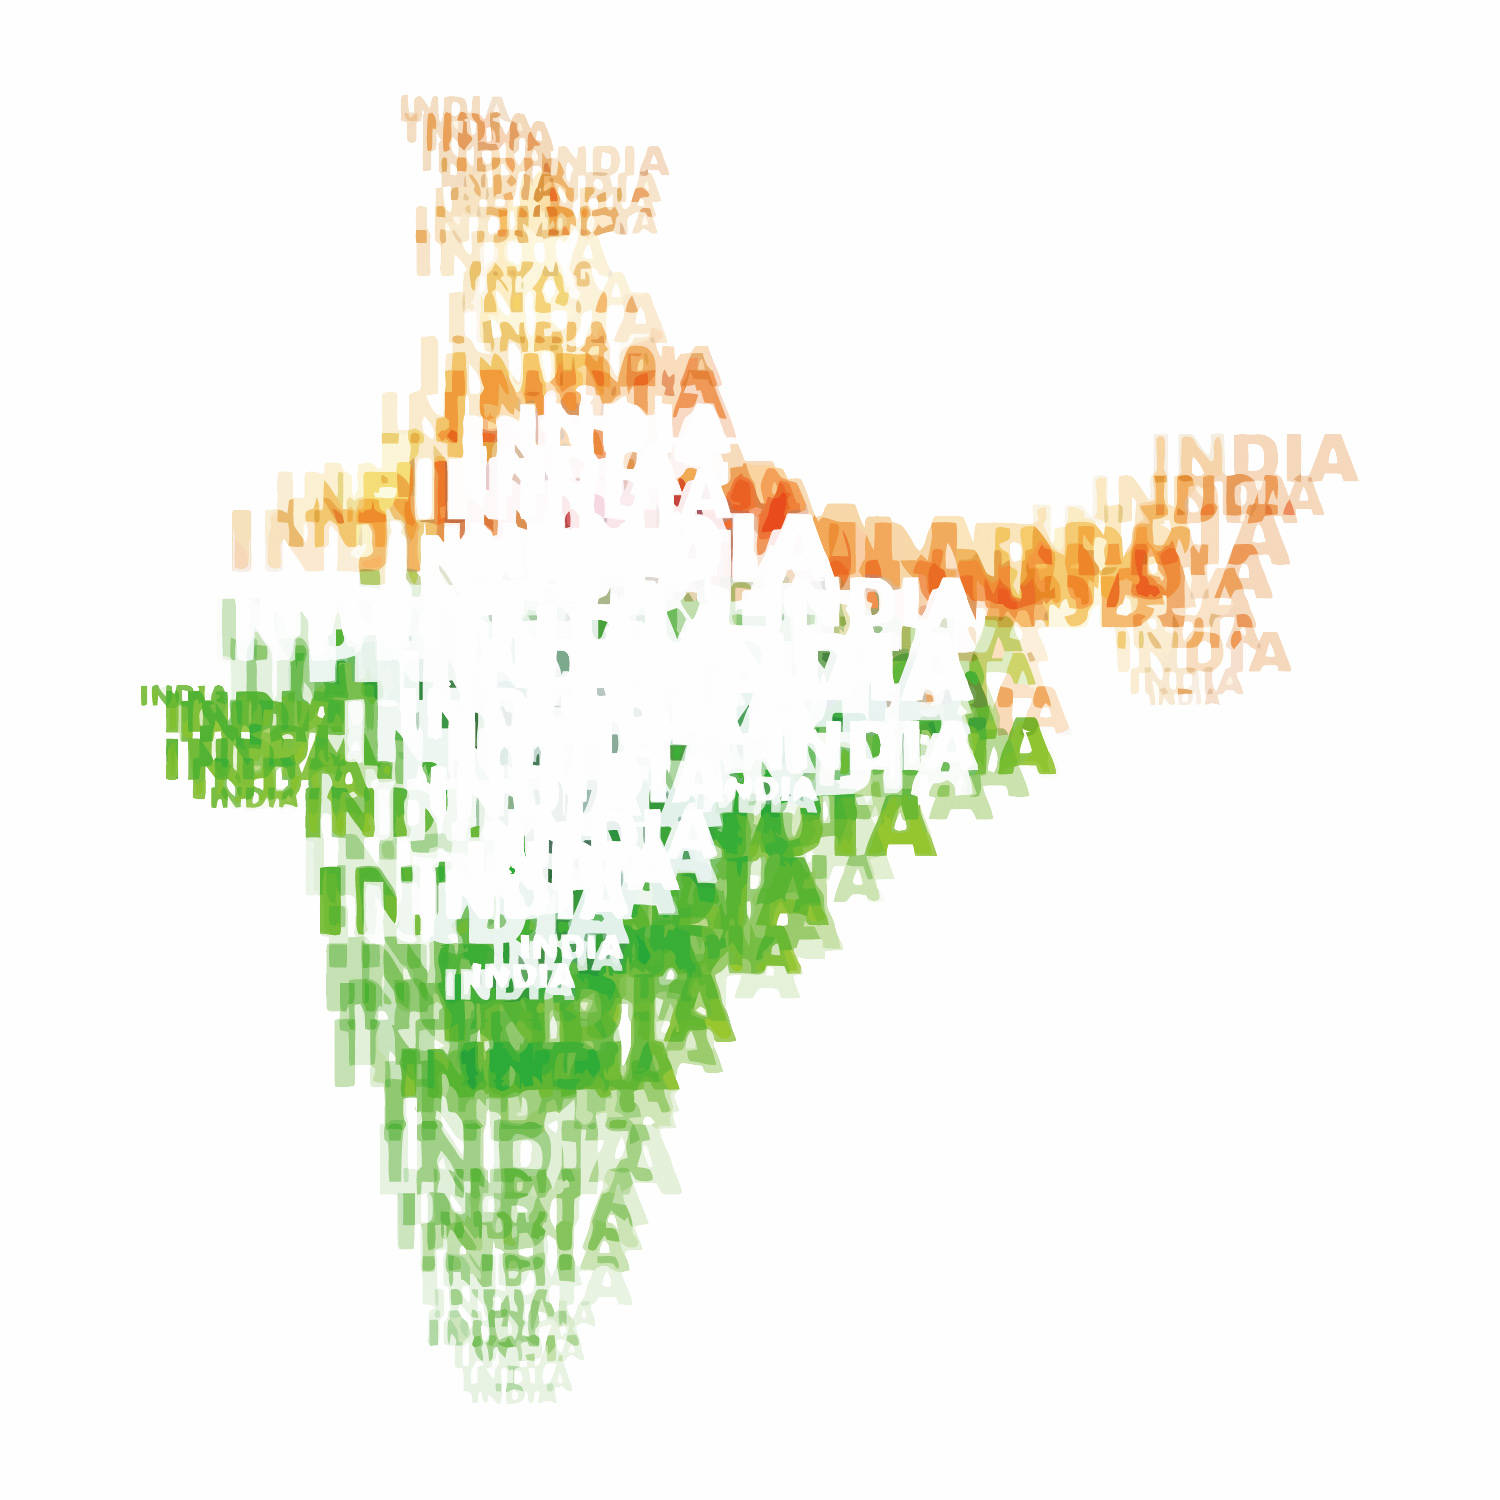 Abstract India Map Typography Wallpaper